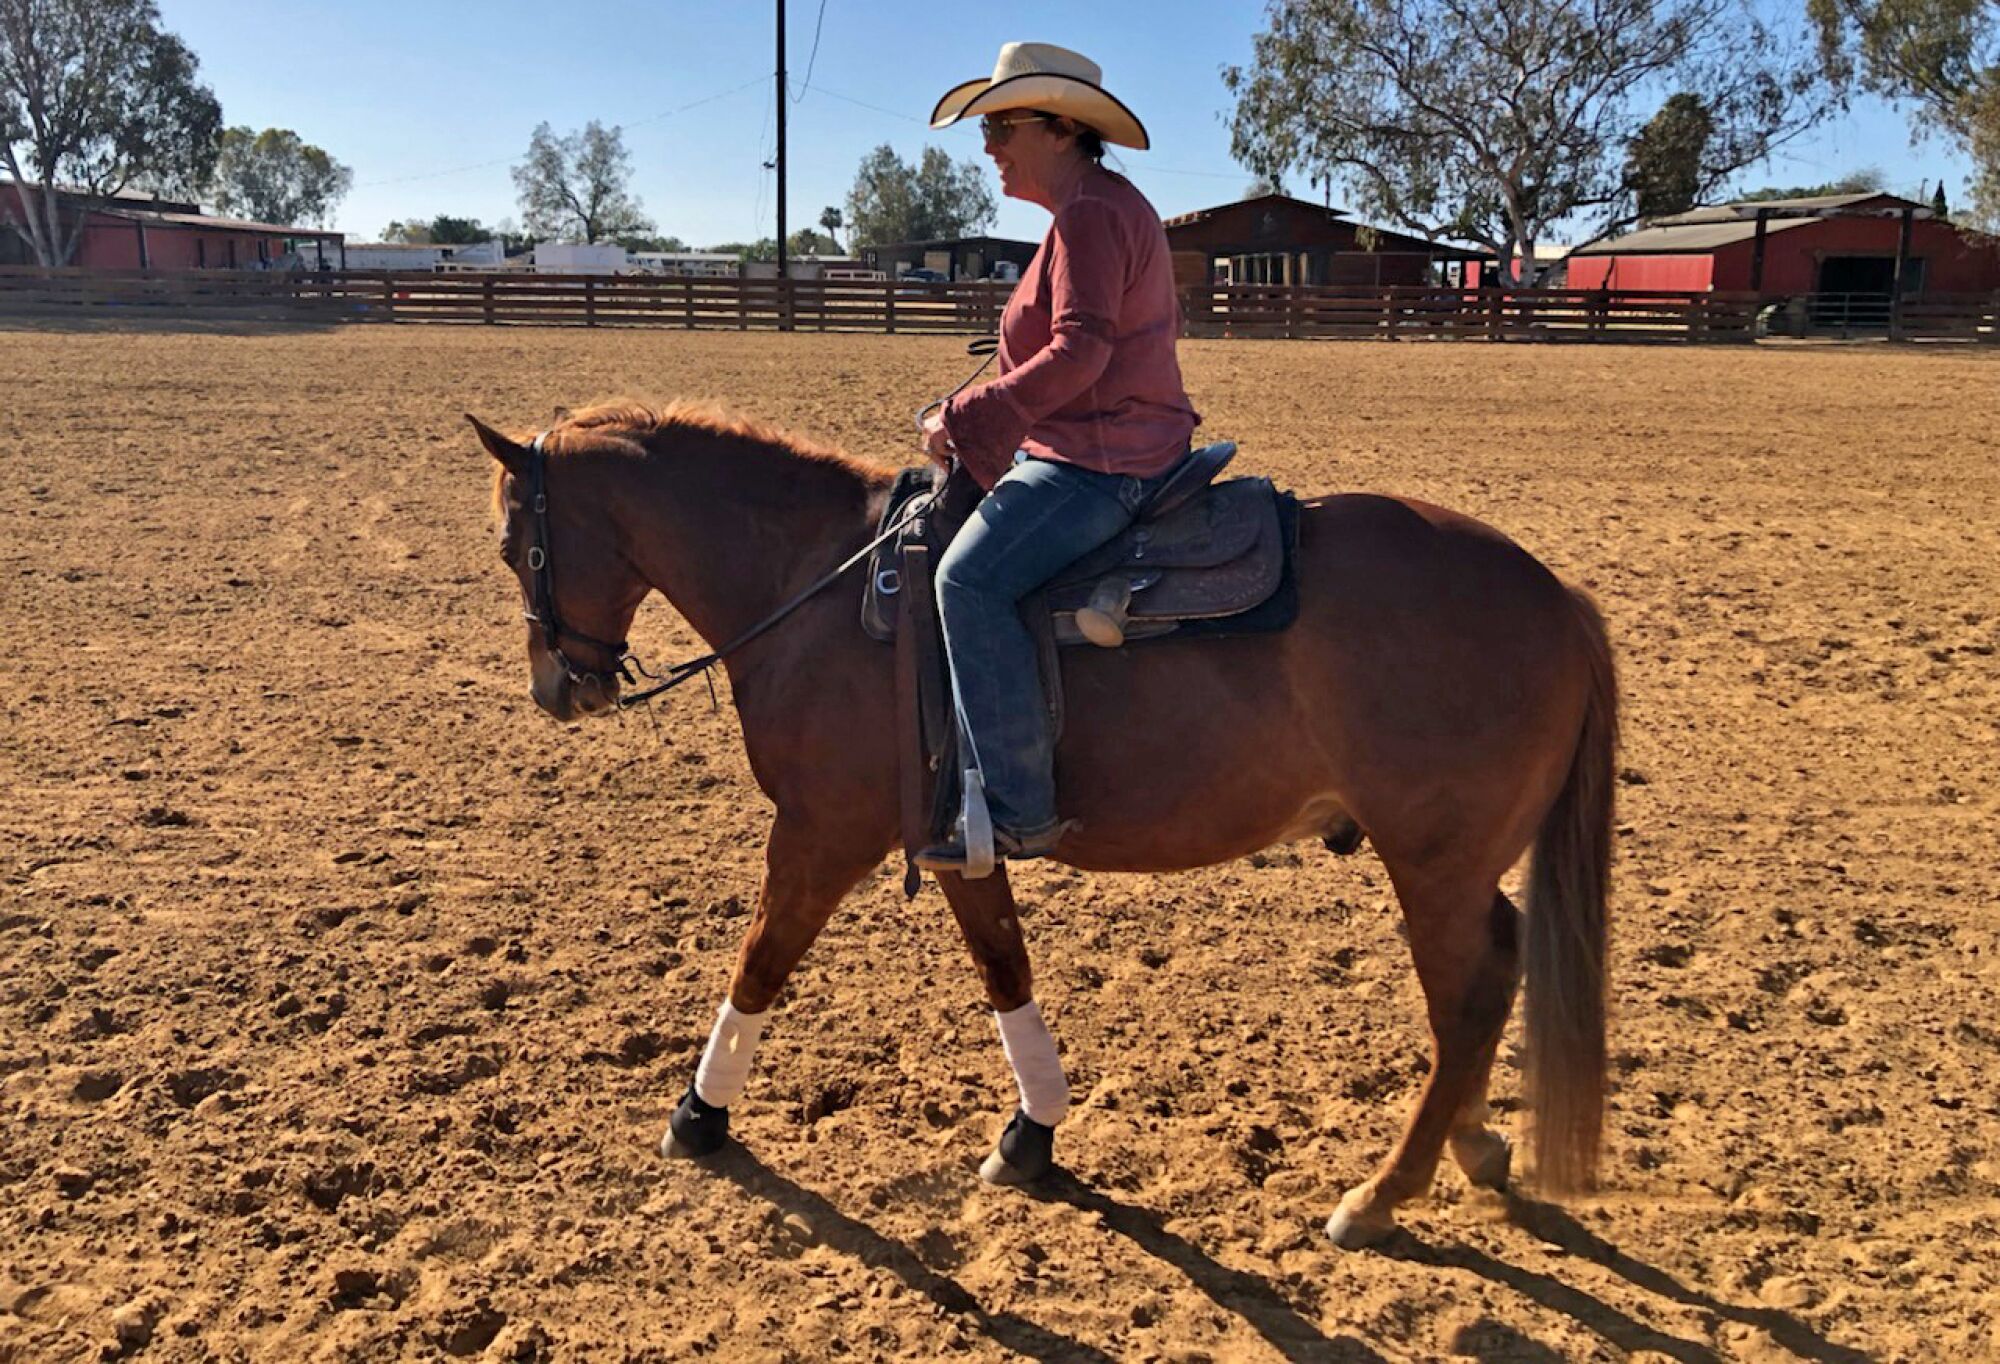 A person in a cowboy hat rides a horse in a large corral.